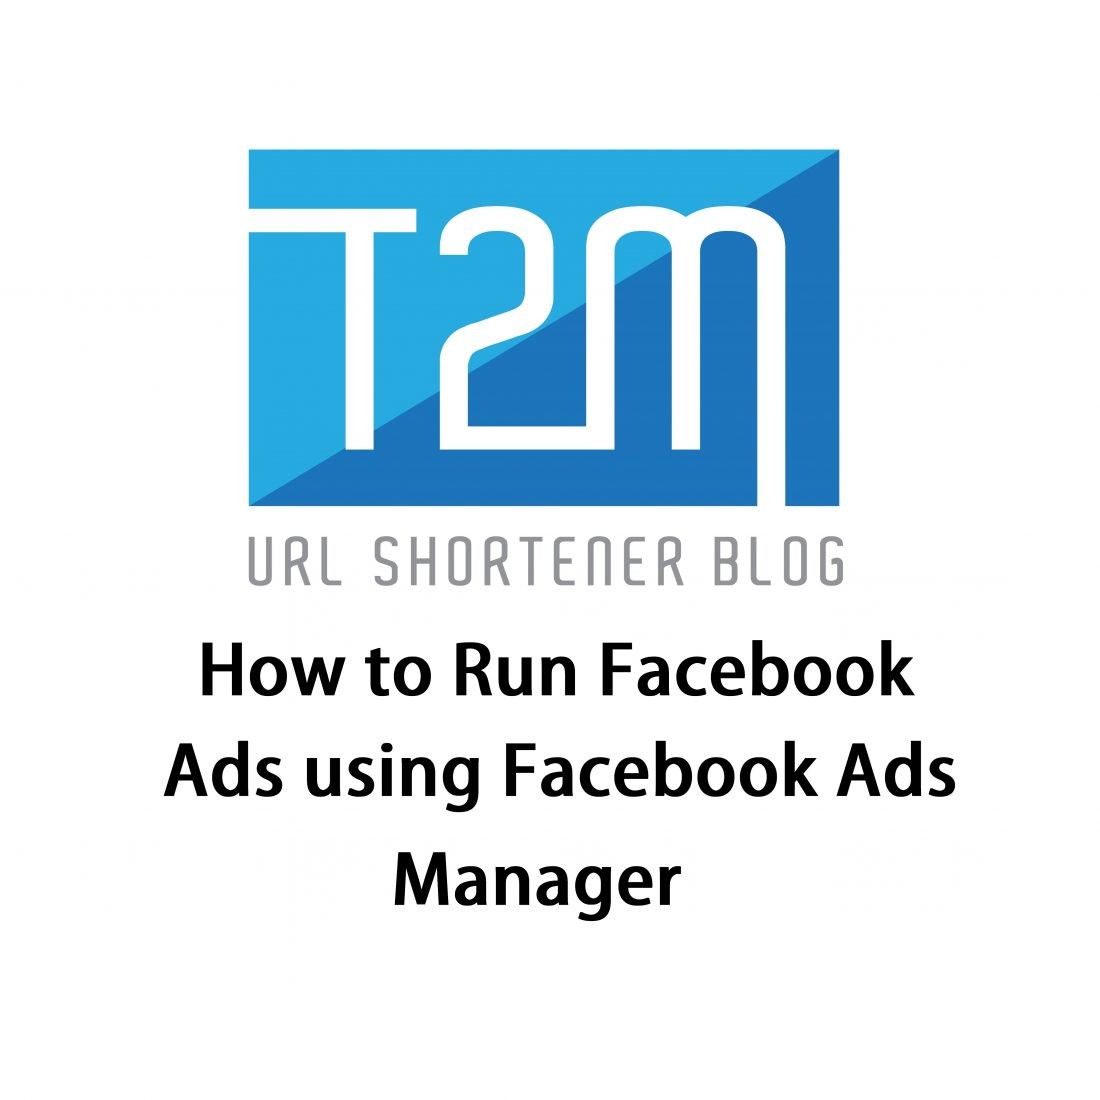 How to Run Facebook Ads using Facebook Ads Manager?